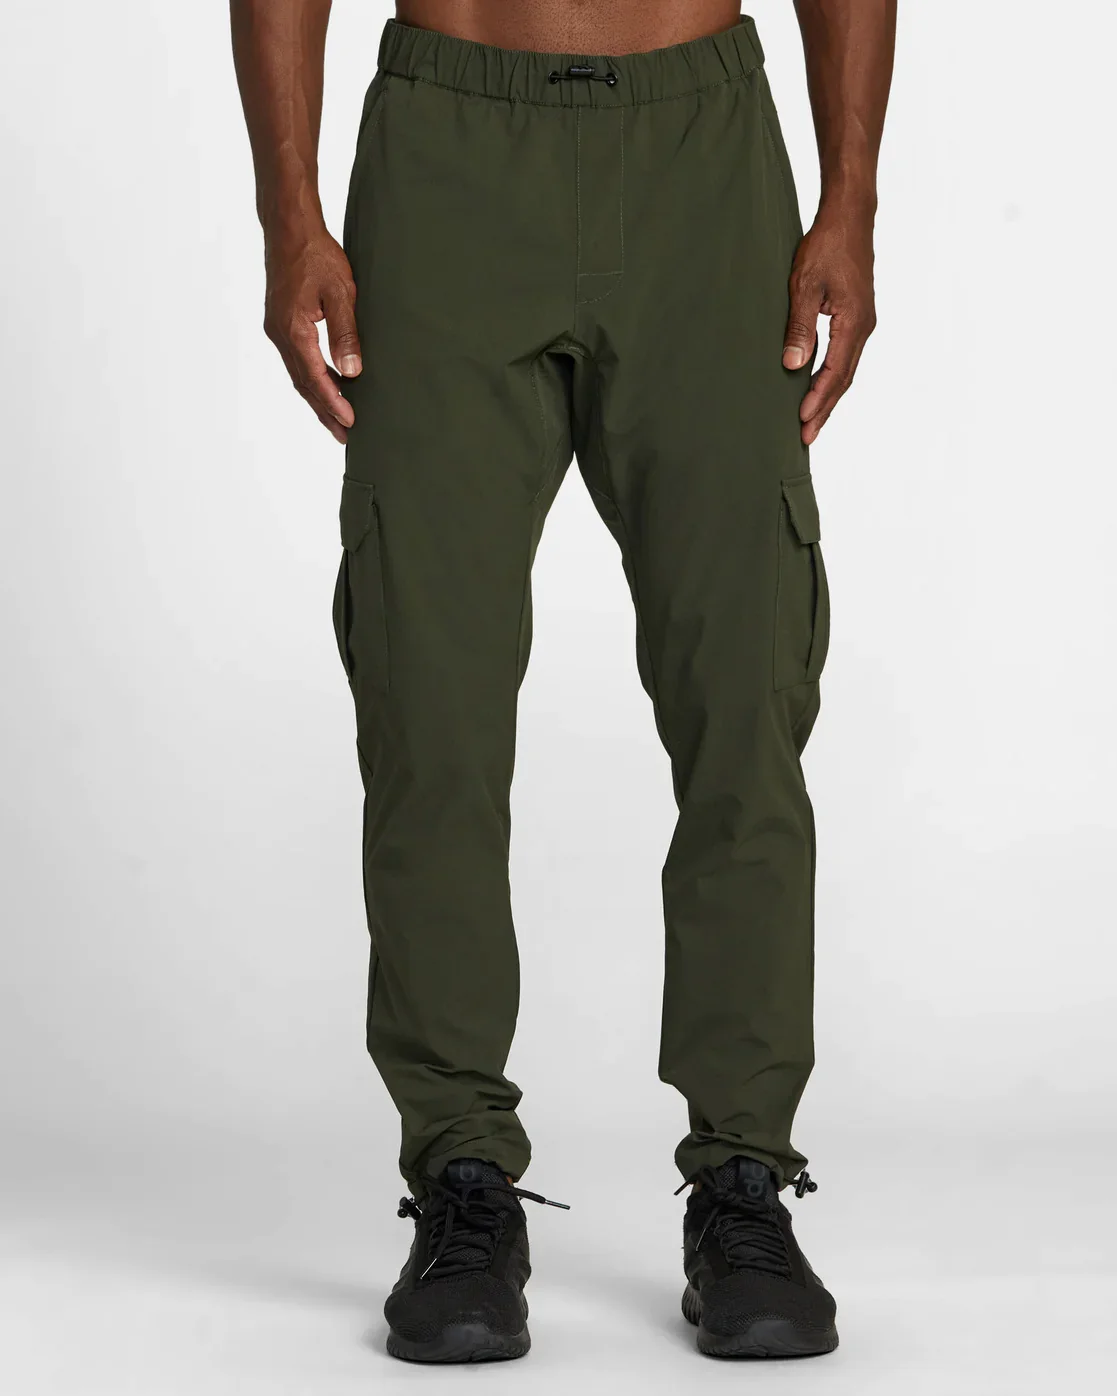 Image of Spectrum Tech Technical Cargo Pants - Military